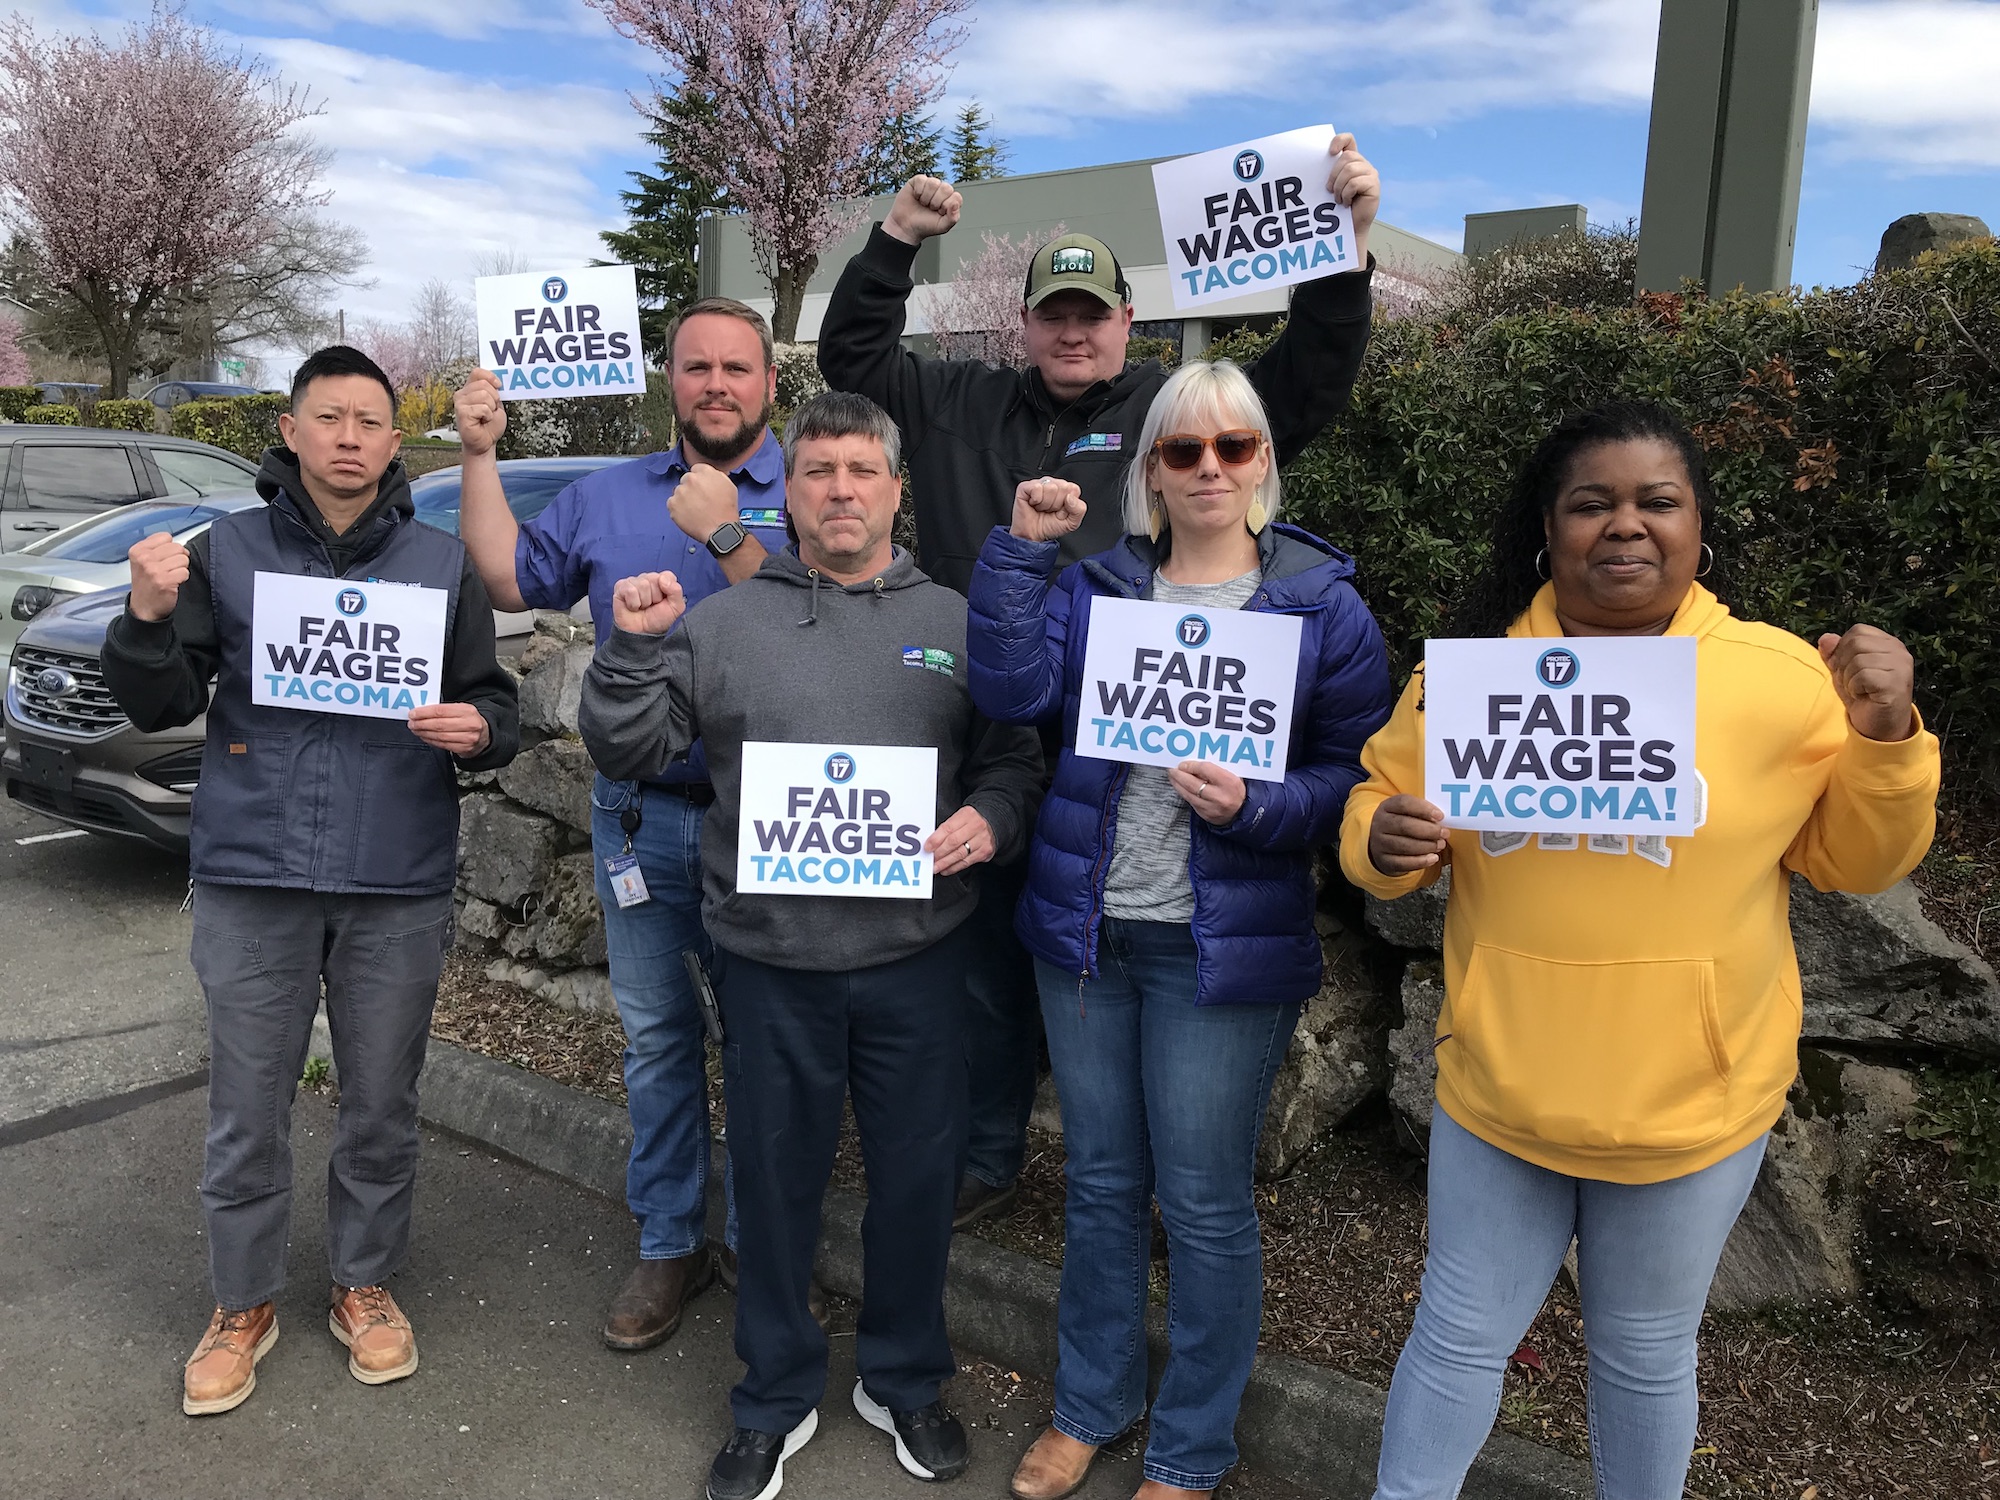 Picture of Tacoma bargaining team holding up their fists in solidarity and carrying "FAIR WAGES NOW!" signs.